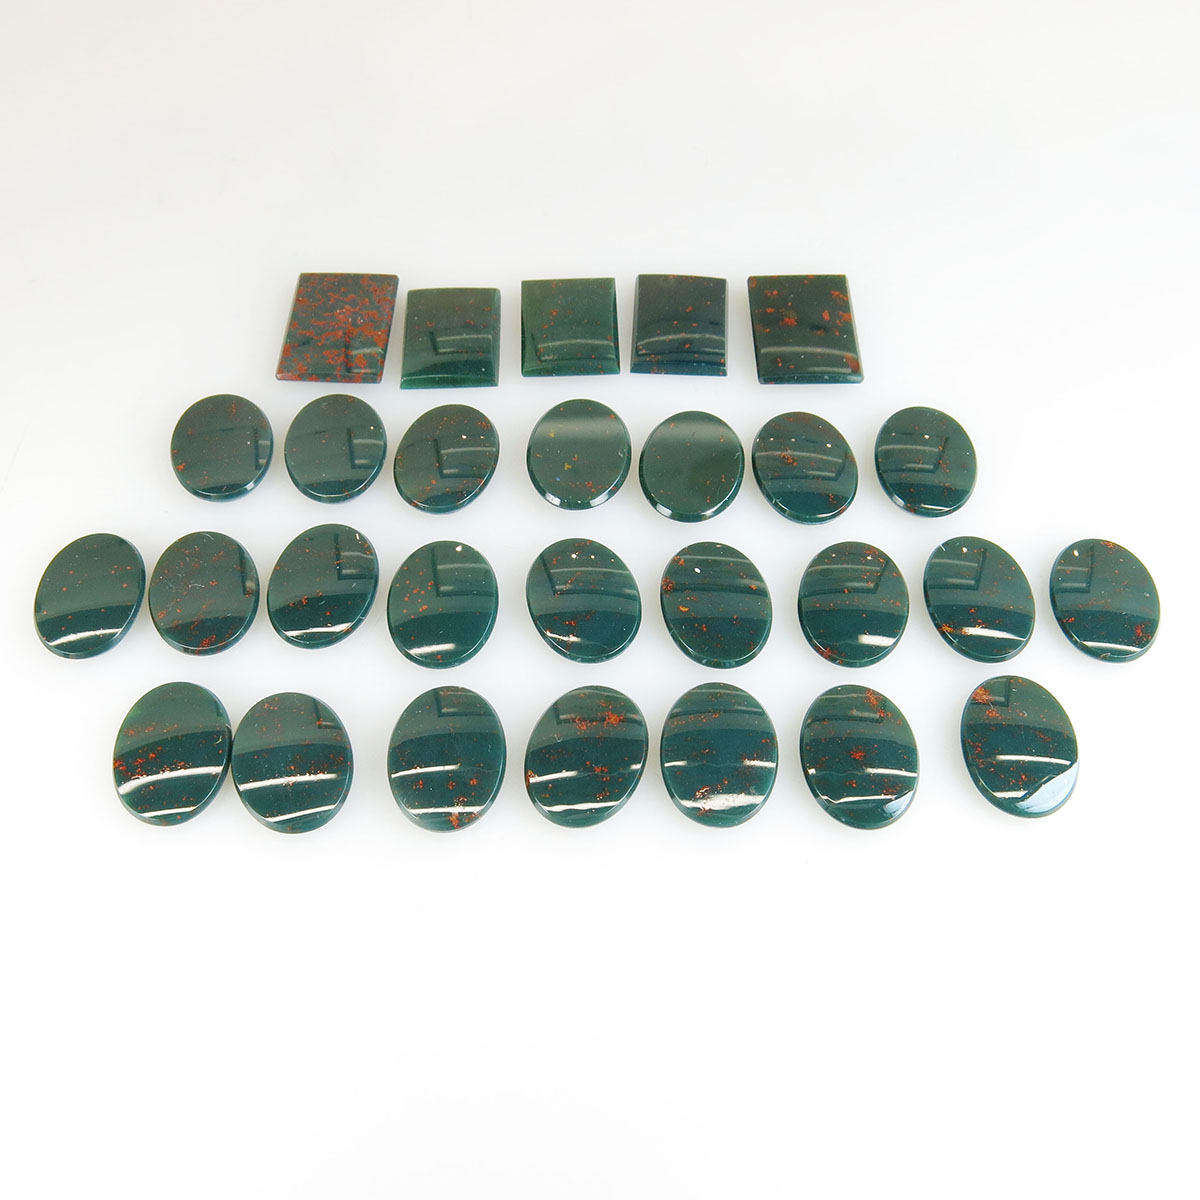 28 Oval And Rectangular Bloodstone Panels